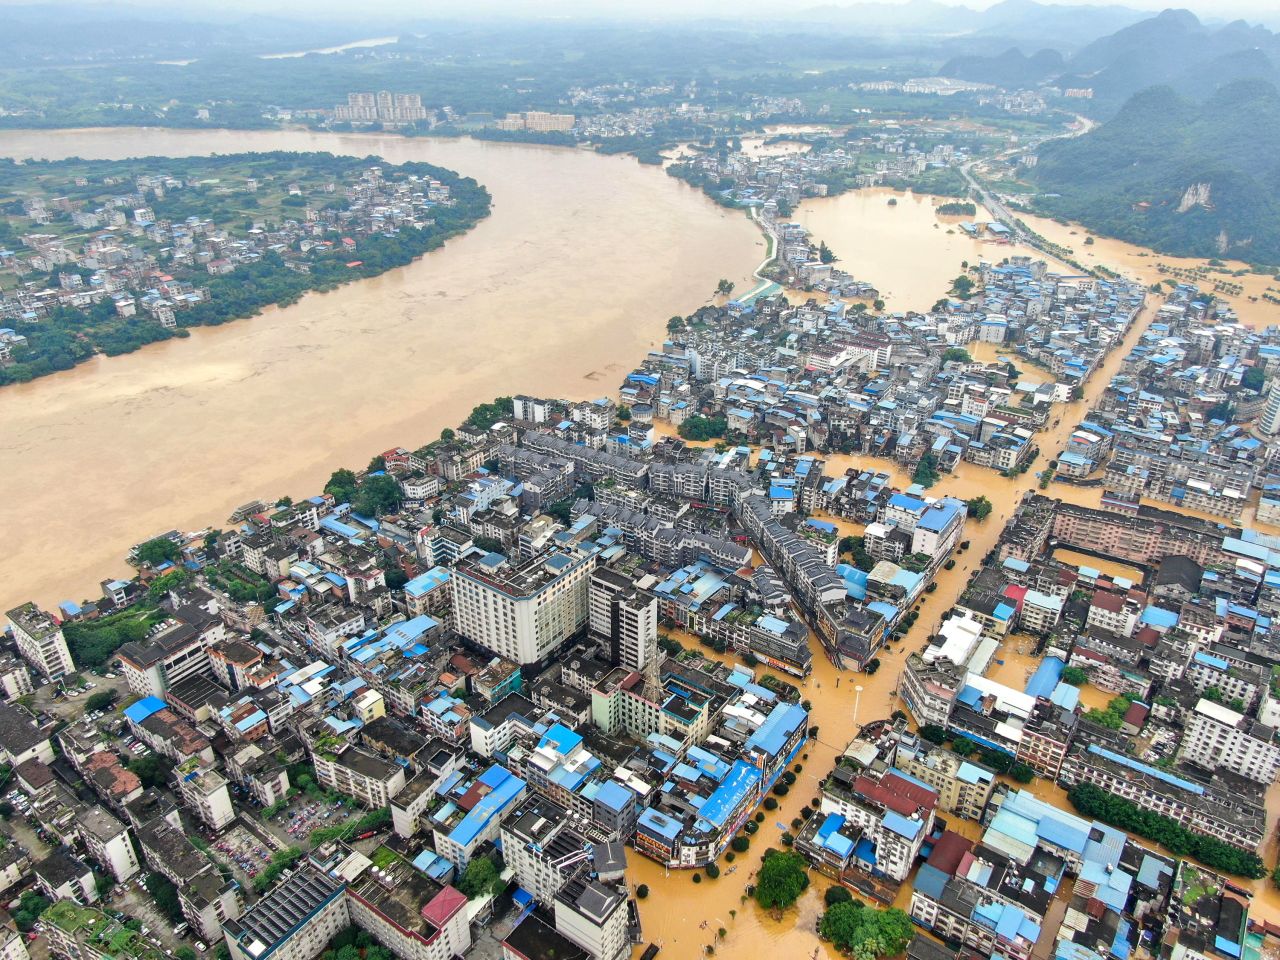 Buildings in Rongshui, China, are submerged by floodwaters on Saturday, July 11. Weeks of torrential rains have caused <a href="https://www.cnn.com/2020/07/14/asia/china-flood-coronavirus-intl-hnk/index.html" target="_blank">China's worst flooding in decades.</a>